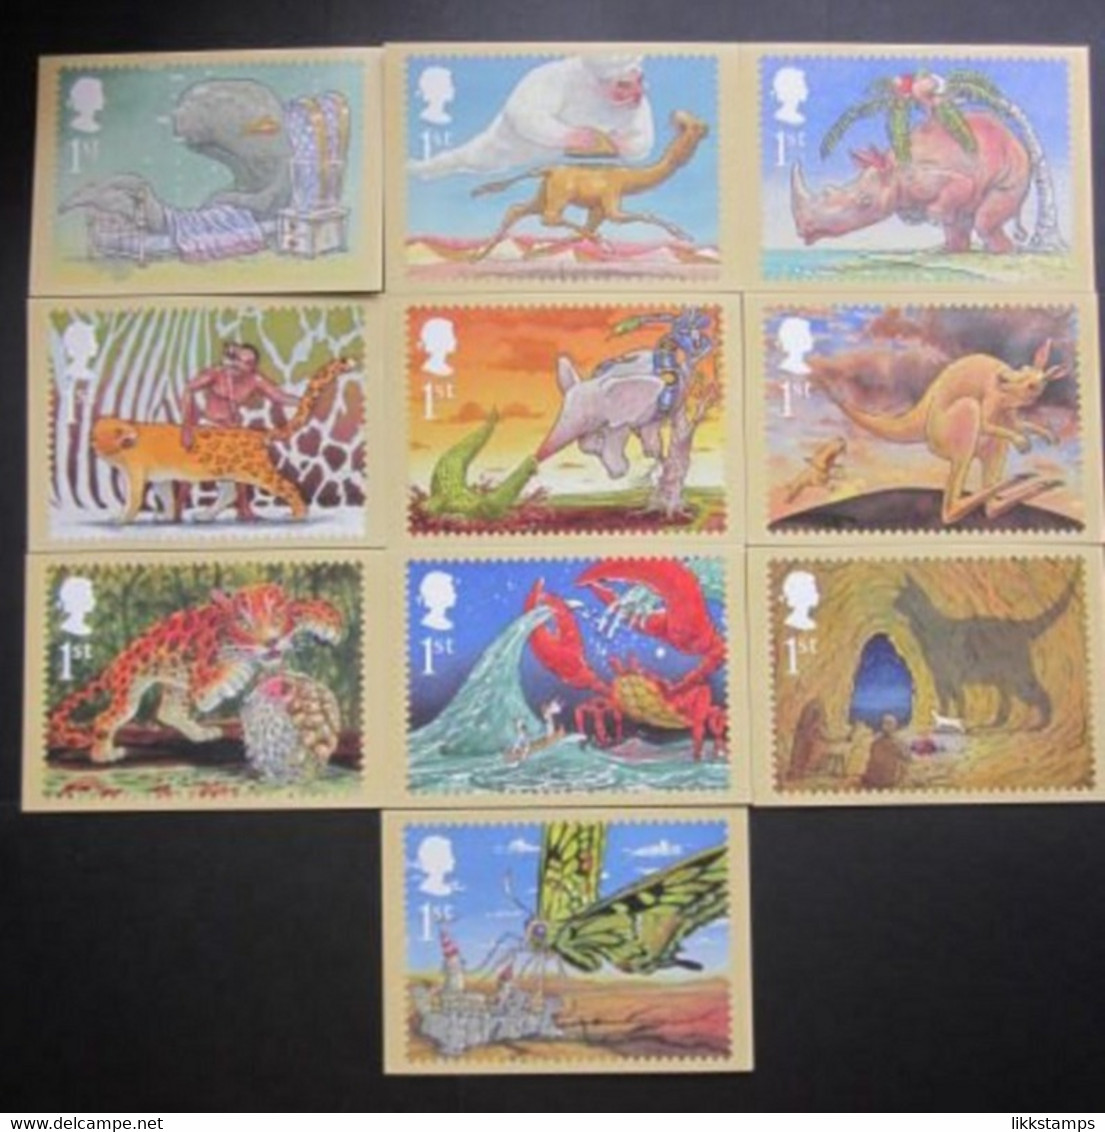 2002 RUDYARD KIPLING'S JUST SO STORIES P.H.Q. CARDS UNUSED, ISSUE No. 237 (B) #00898 - Cartes PHQ